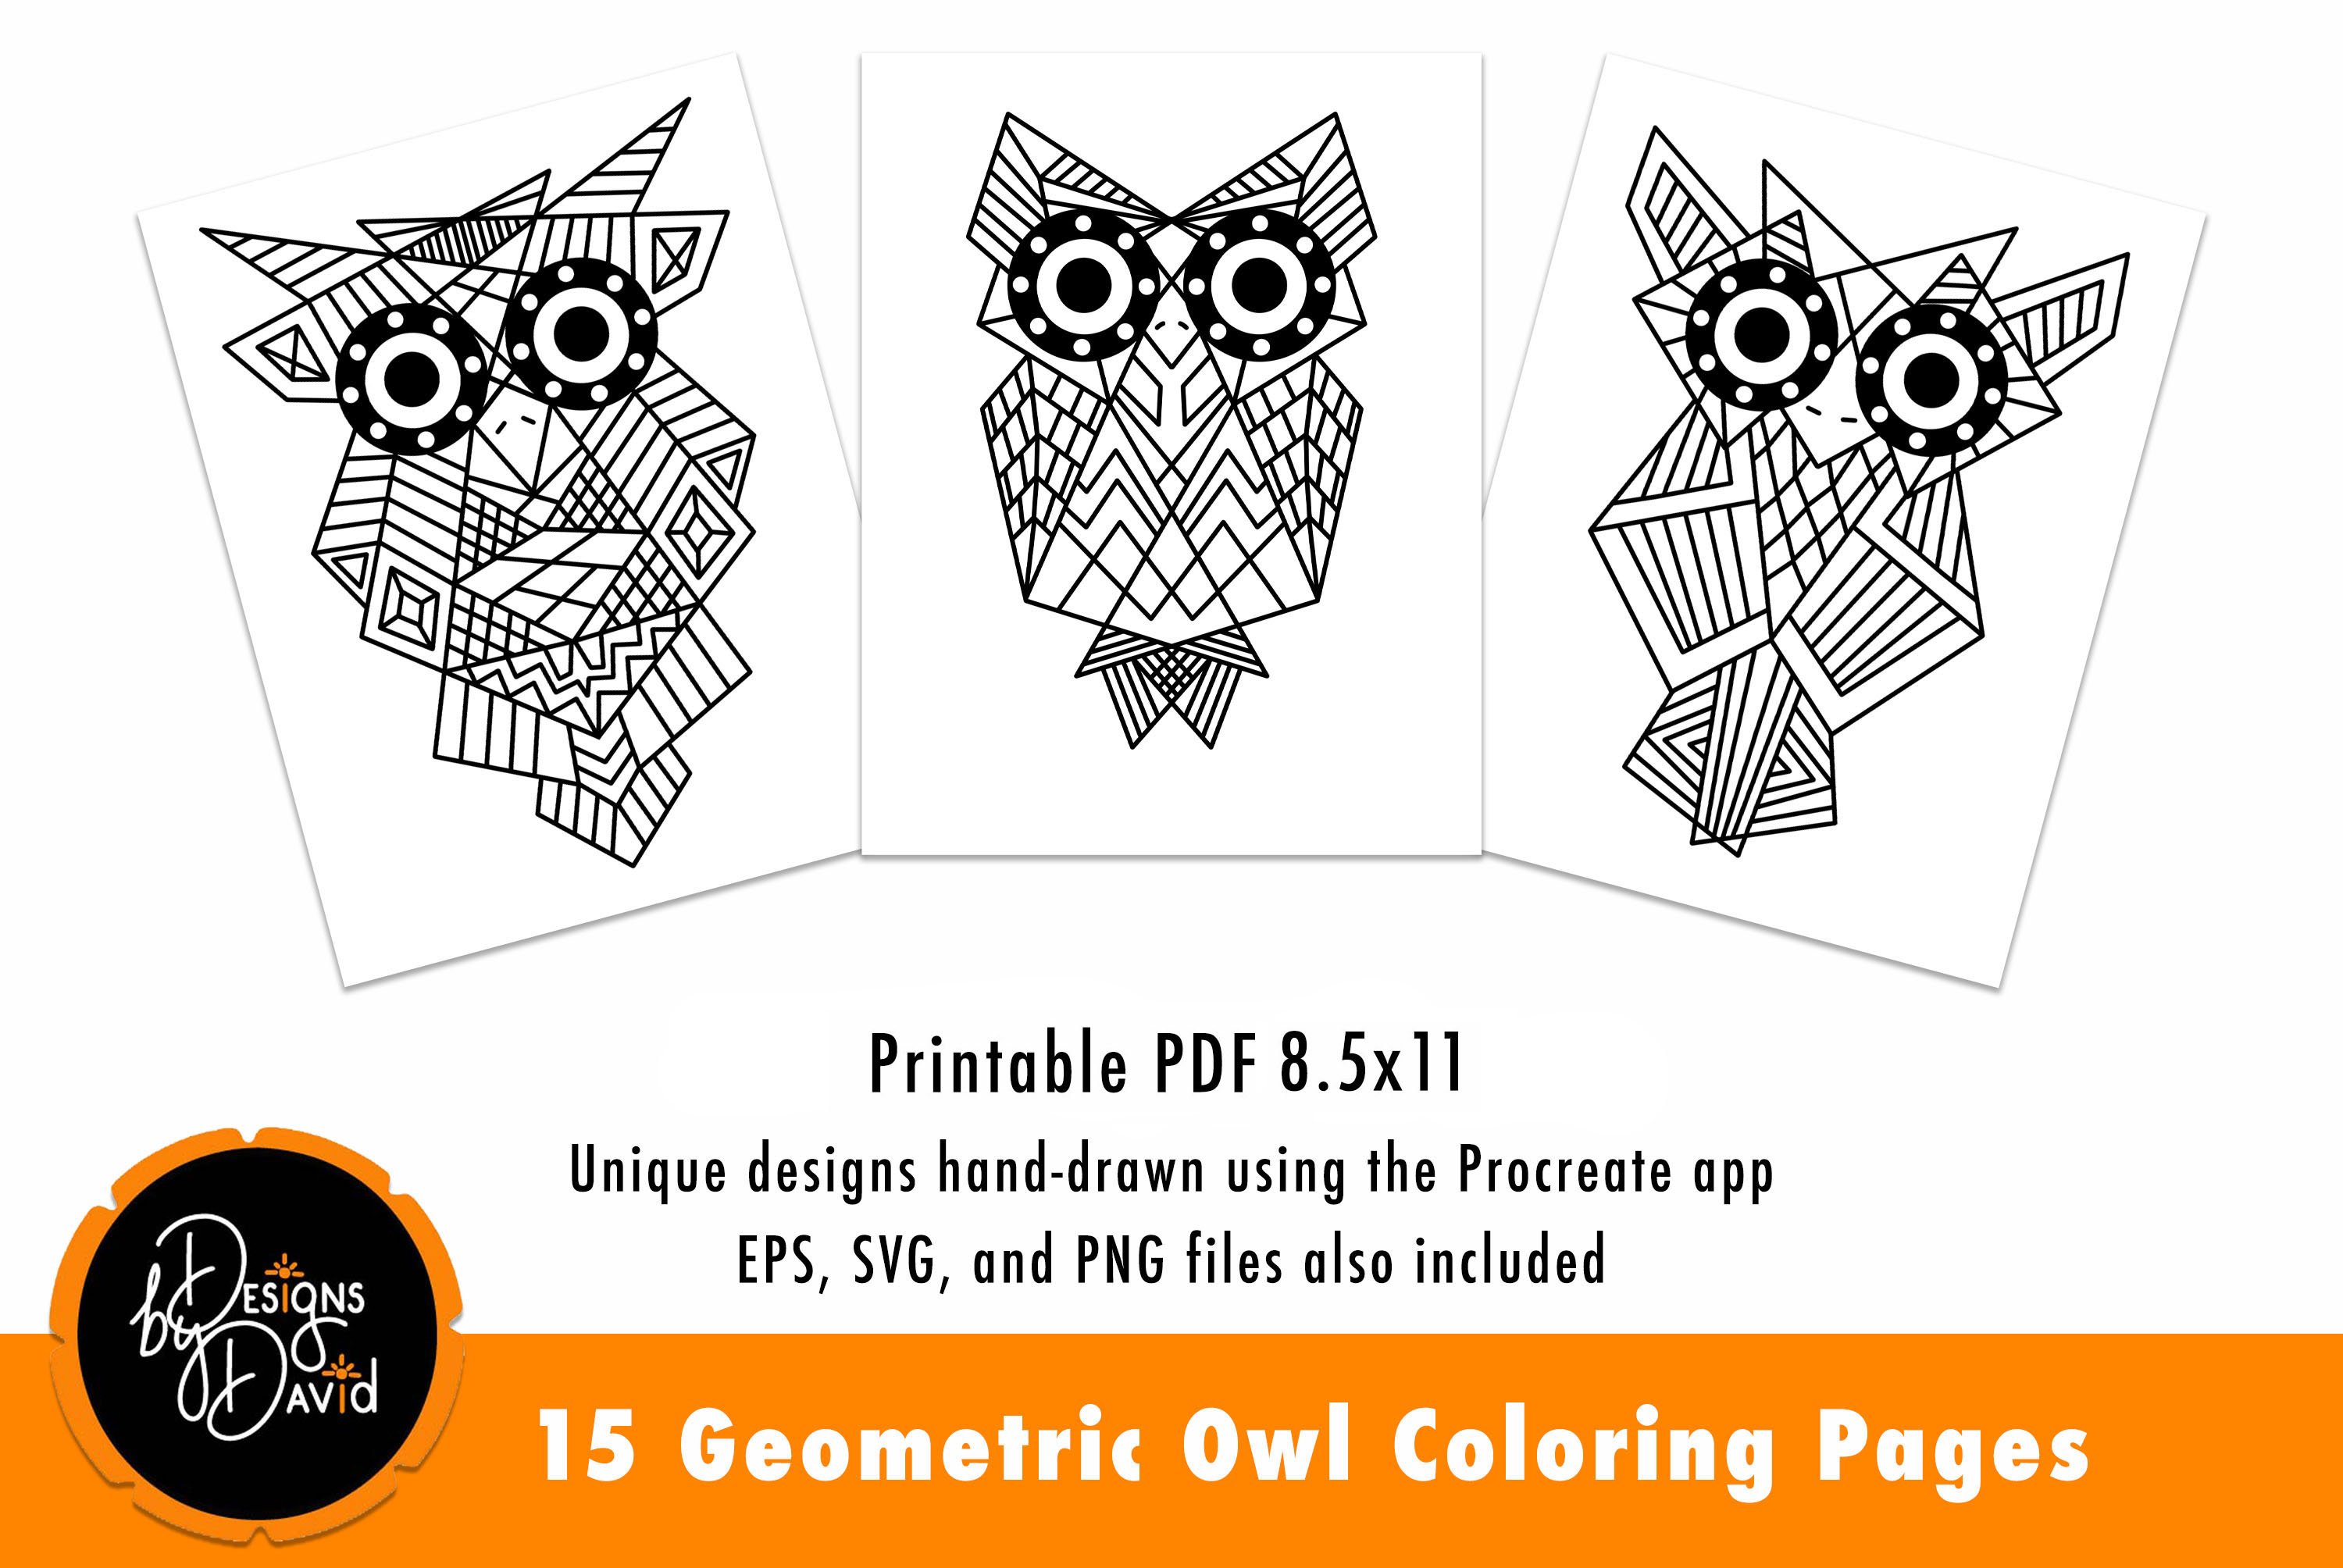 Geometric owl coloring pages printable pdf